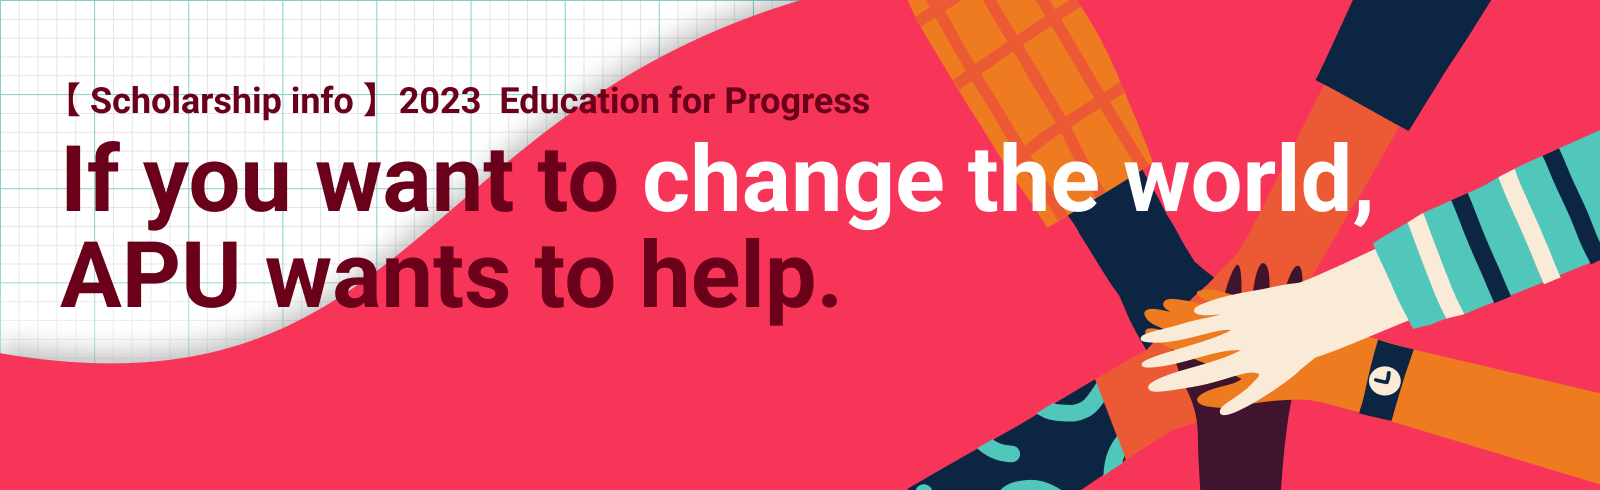 【 Scholarship info 】2023 Education for Progress If you want to change the world, APU wants to help.